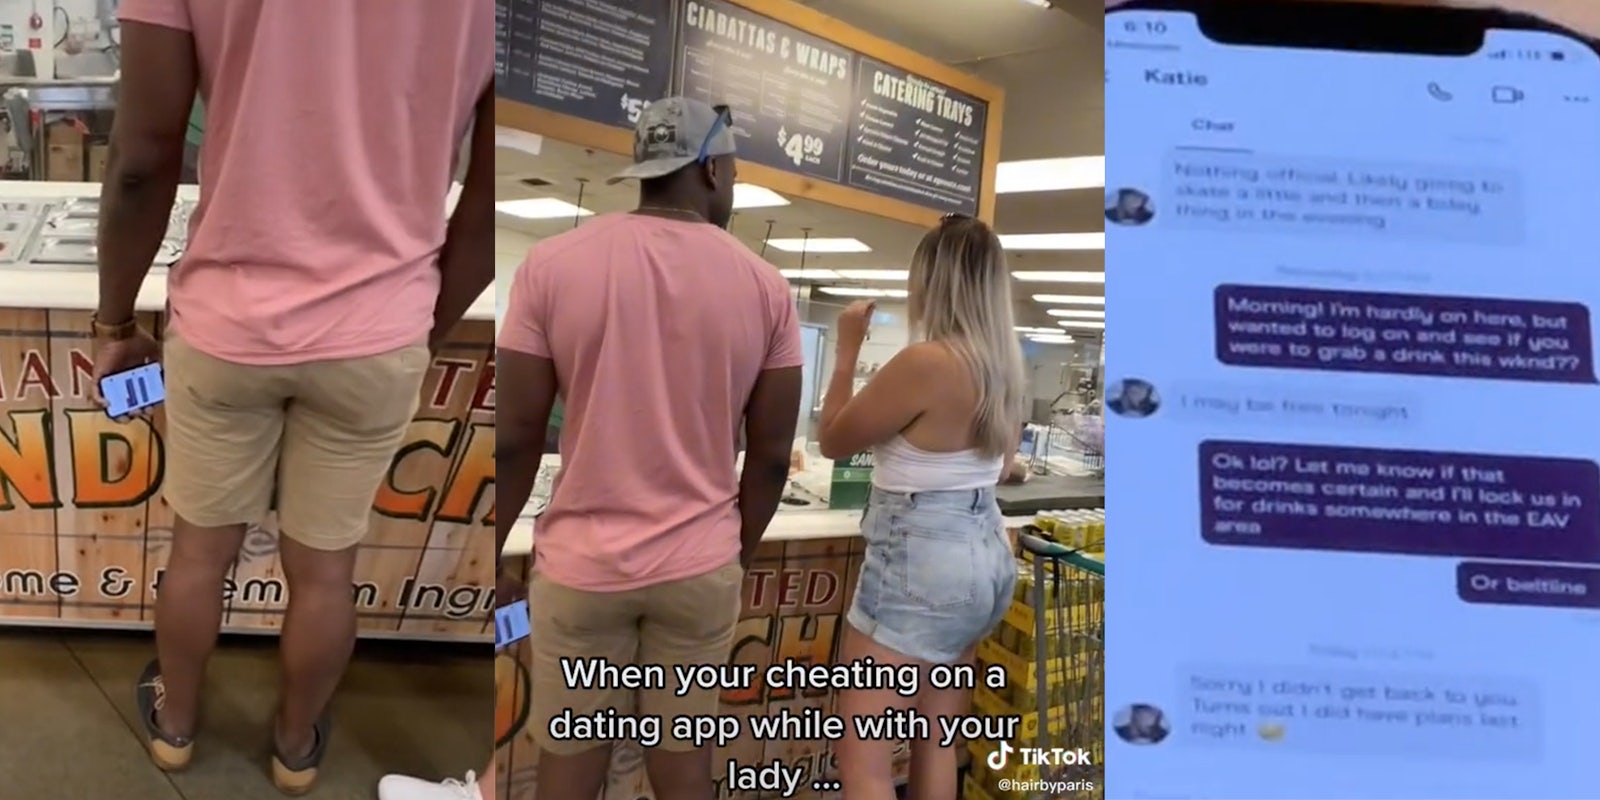 man at counter holding phone (l) man at counter with woman, caption 'when your cheating on a dating app while with your lady...' (c) close up of a message exchange on phone (r)